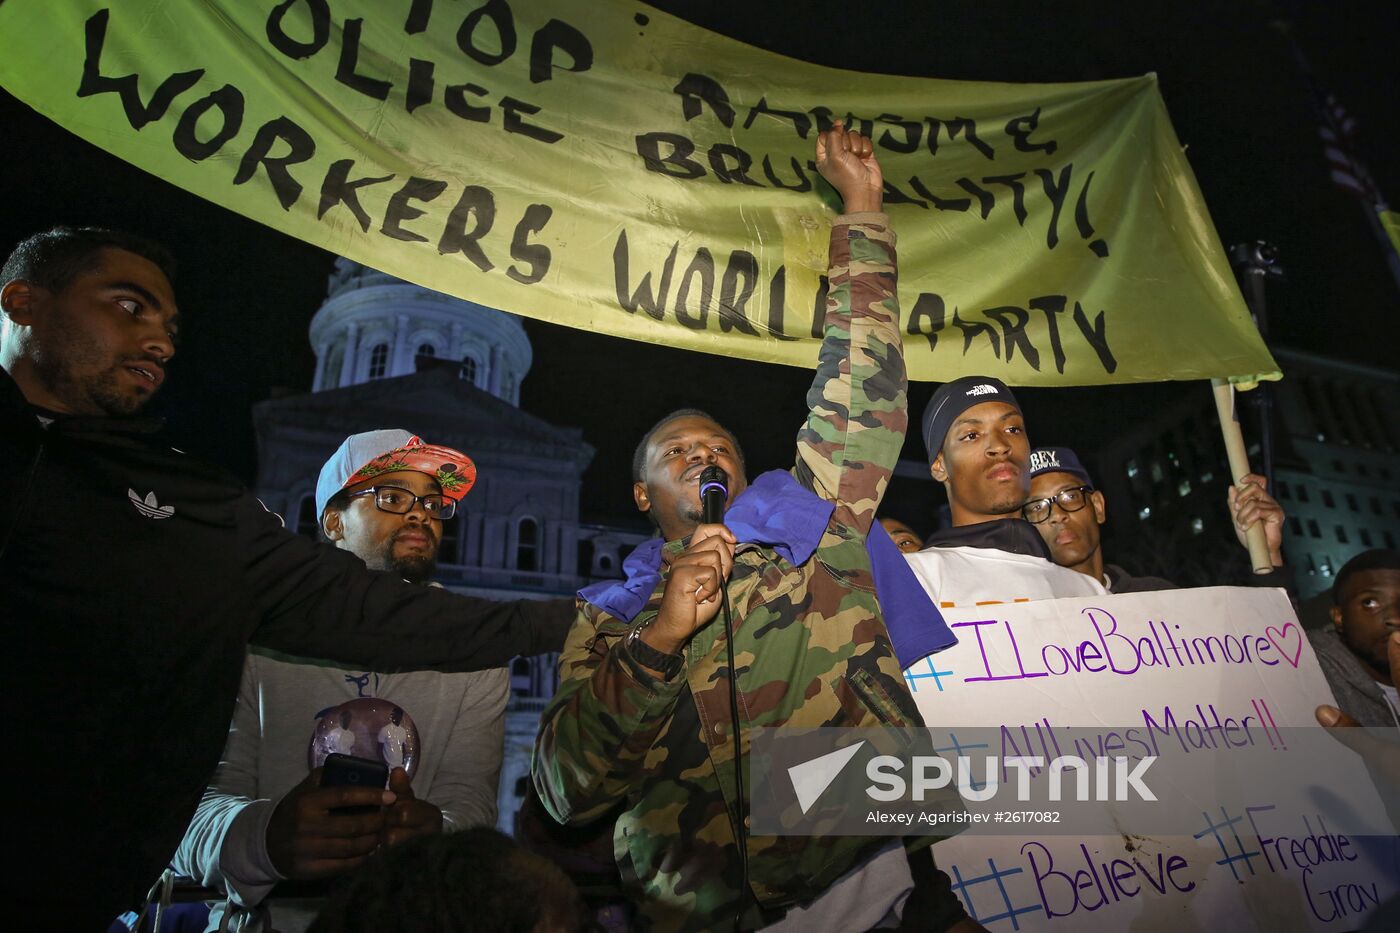 Protesters rally against violence of Baltimore police